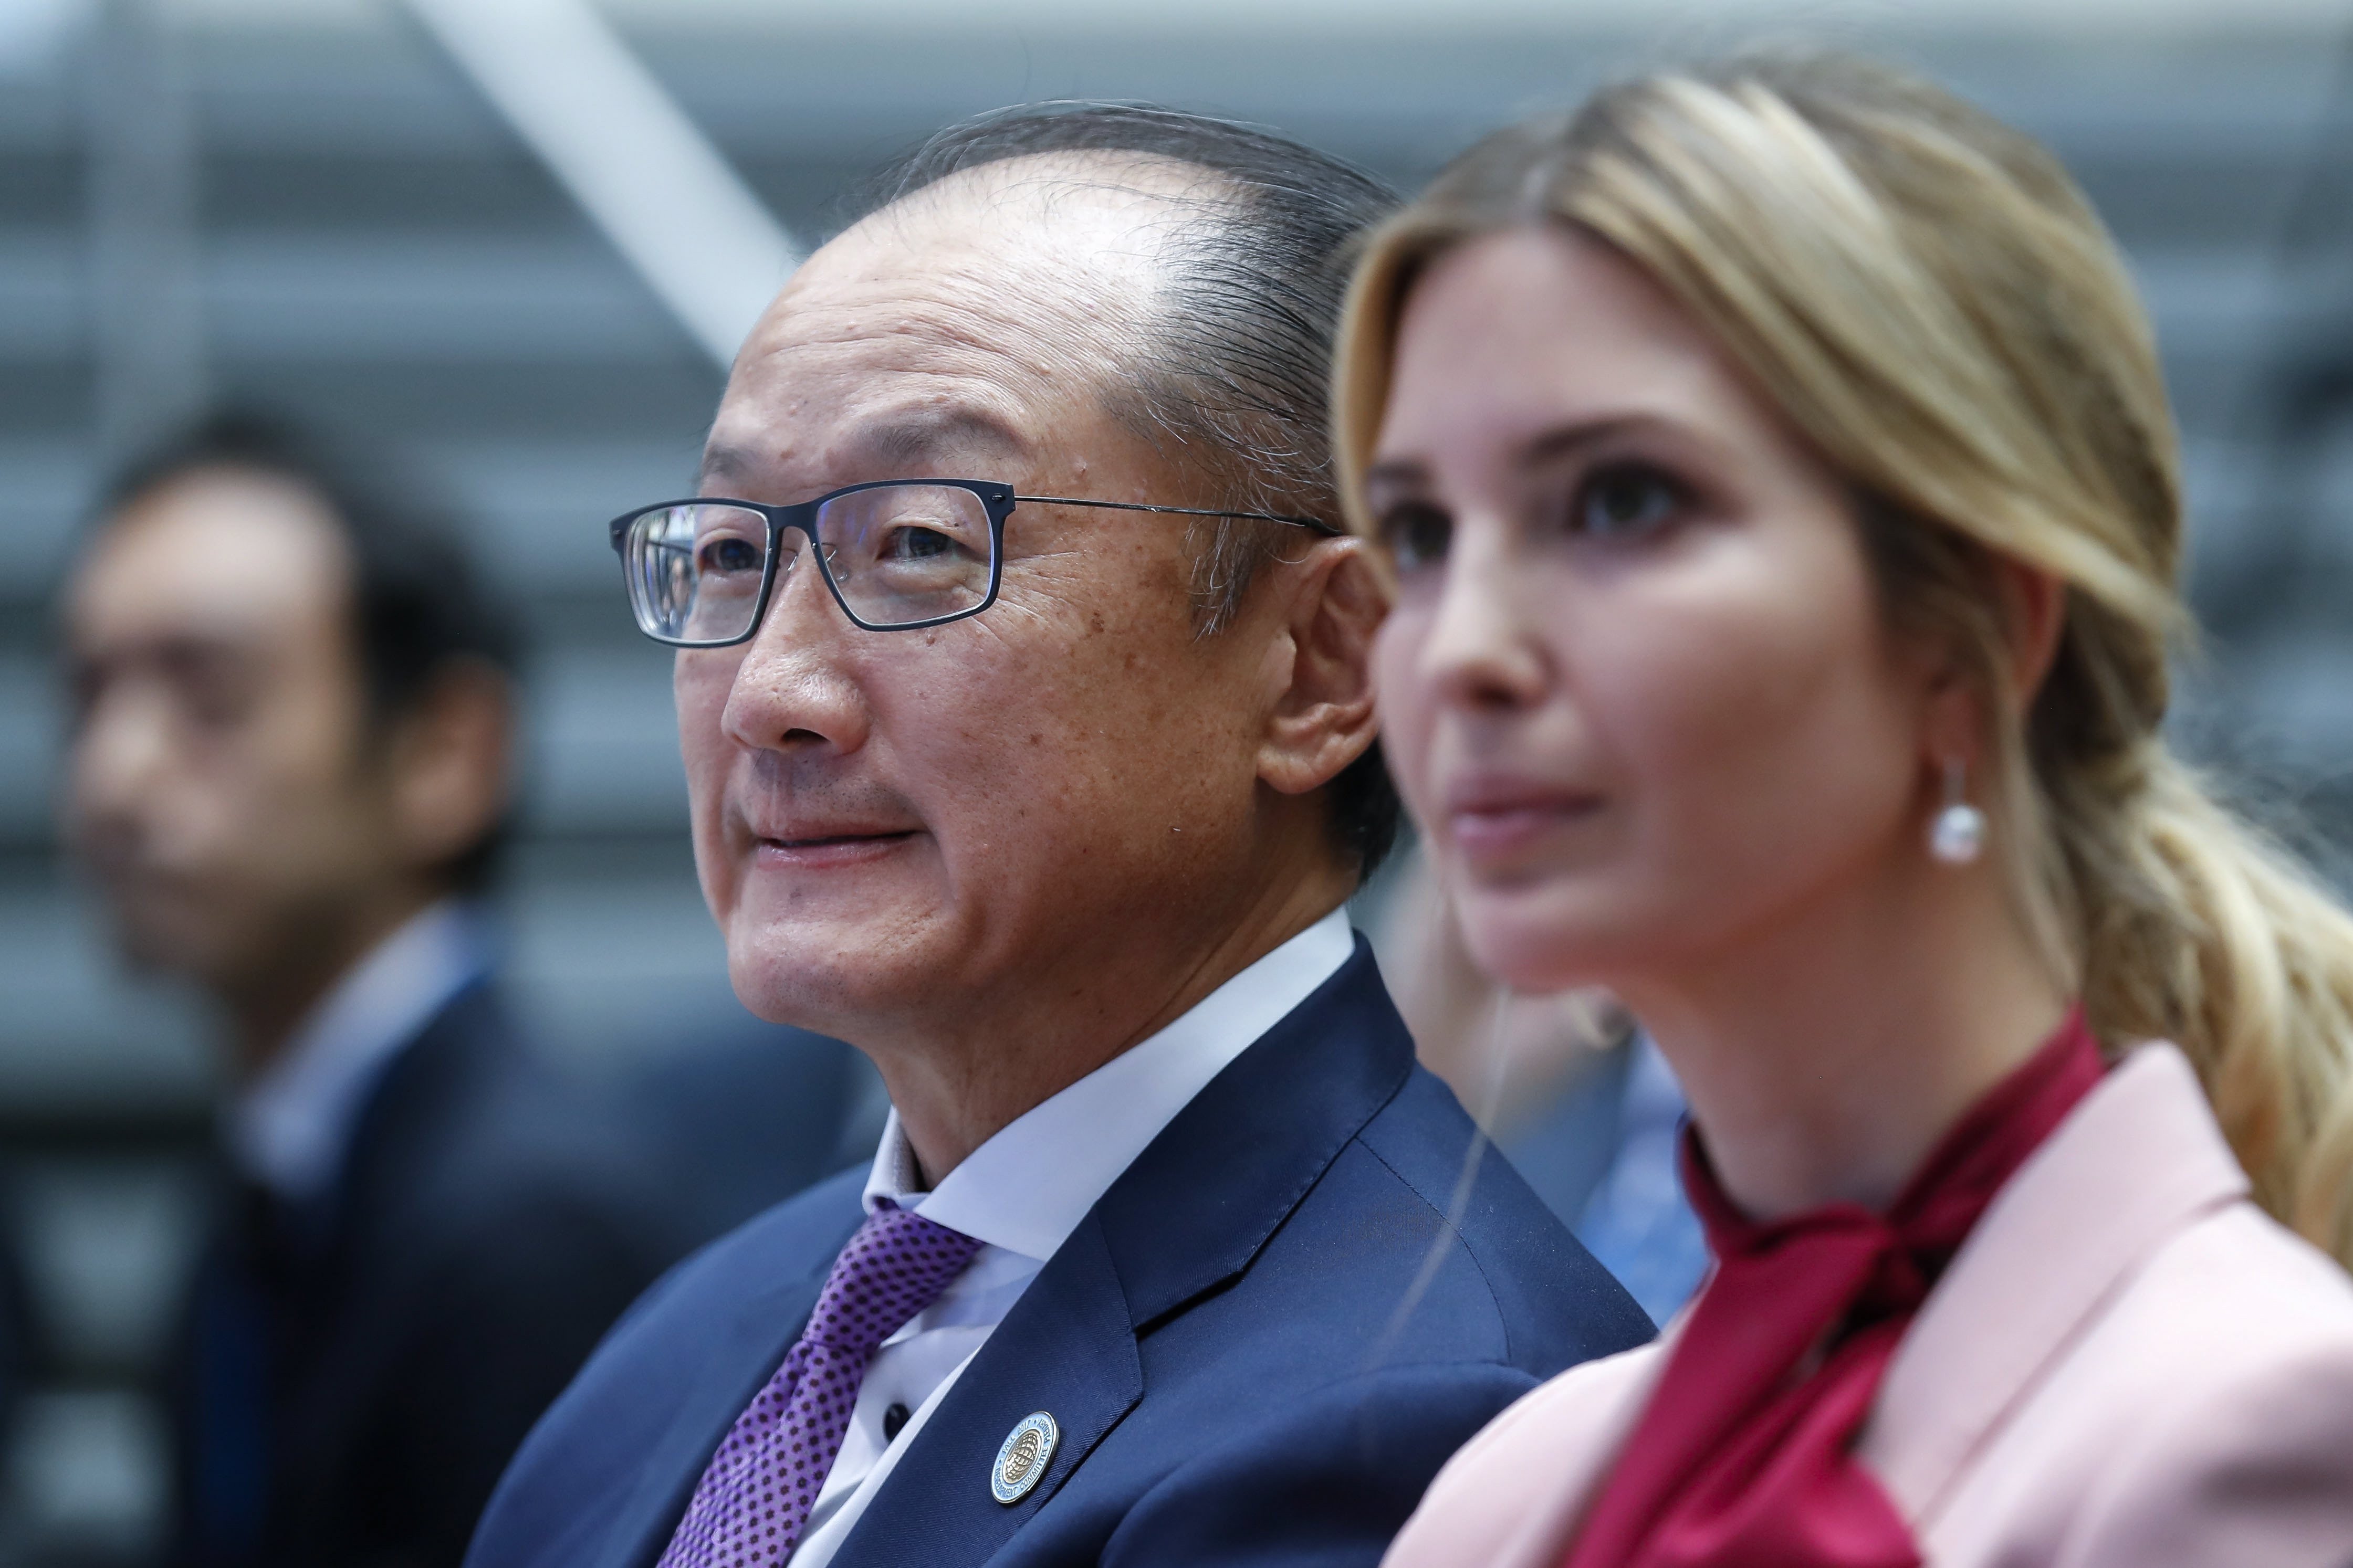 Jim Yong Kim, who recently resigned as World Bank president, with Ivanka Trump, daughter of US President Donald Trump, before the Women Entrepreneurs Finance Initiative panel discussion during the IMF World Bank Group annual meetings at the IMF headquarters in Washington in October 2017. Photo: EPA-EFE